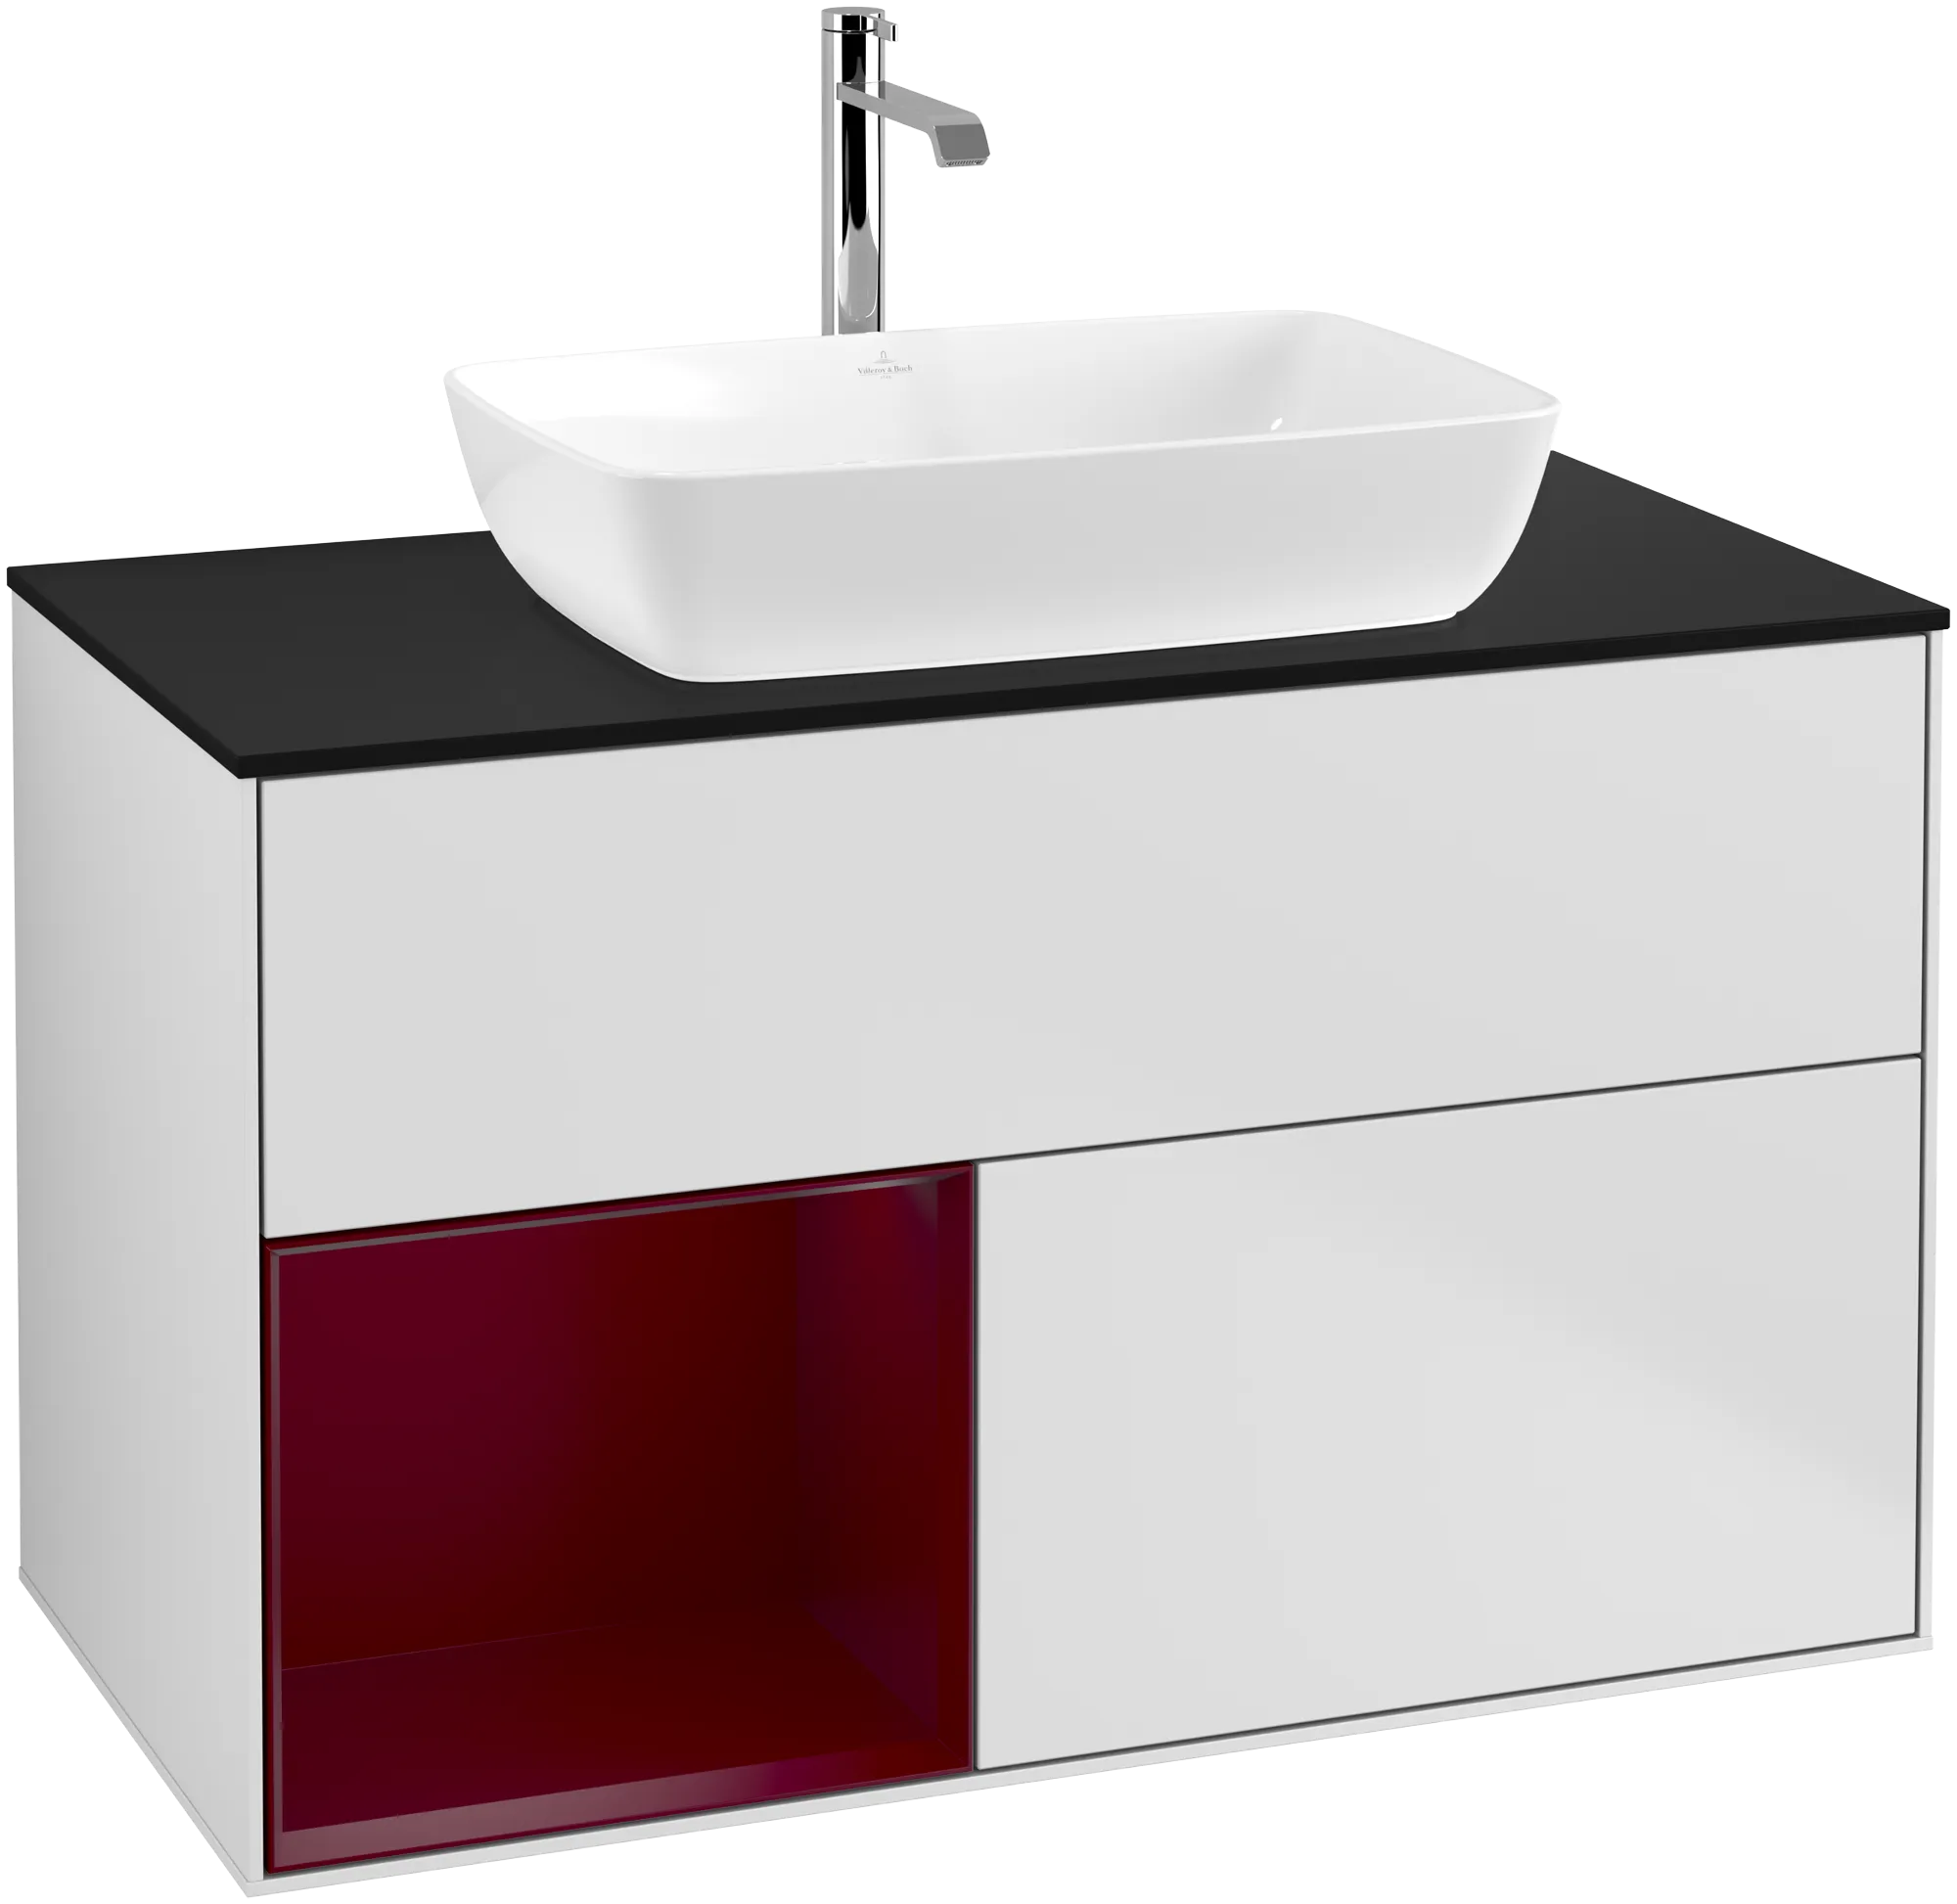 Picture of VILLEROY BOCH Finion Vanity unit, with lighting, 2 pull-out compartments, 1000 x 603 x 501 mm, White Matt Lacquer / Peony Matt Lacquer / Glass Black Matt #G772HBMT